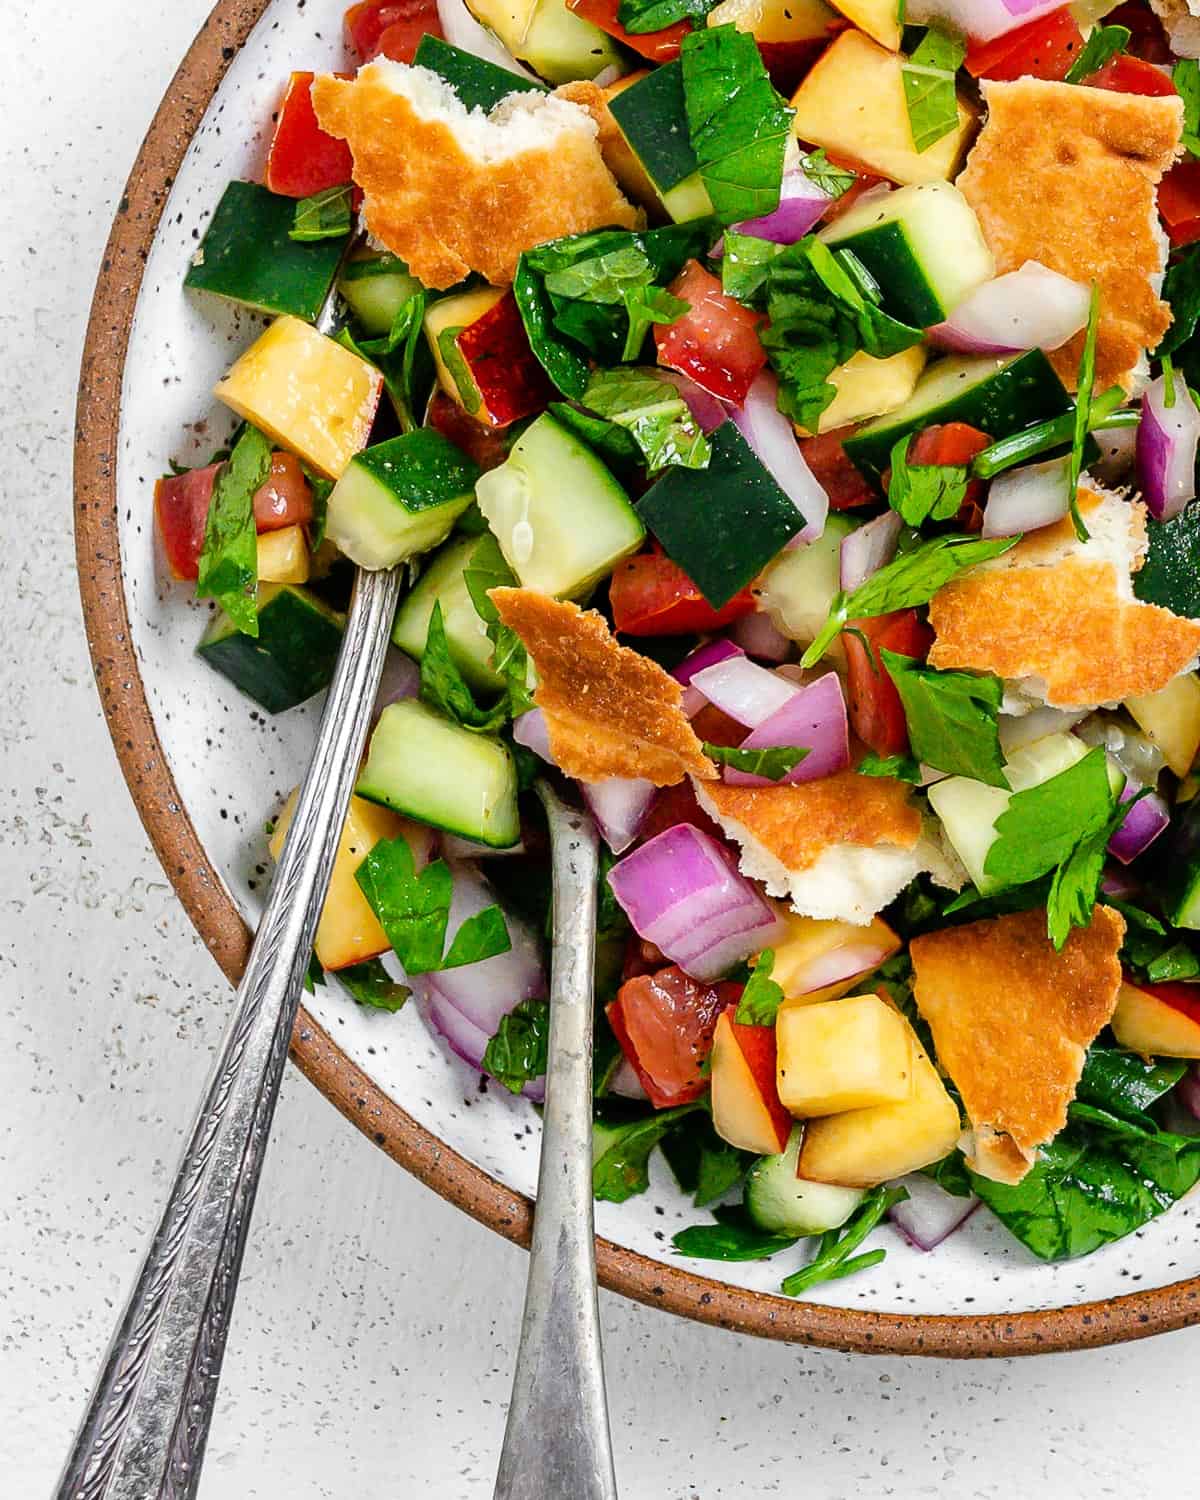 completed Easy Summer Fattoush Salad in a white bowl against a light background